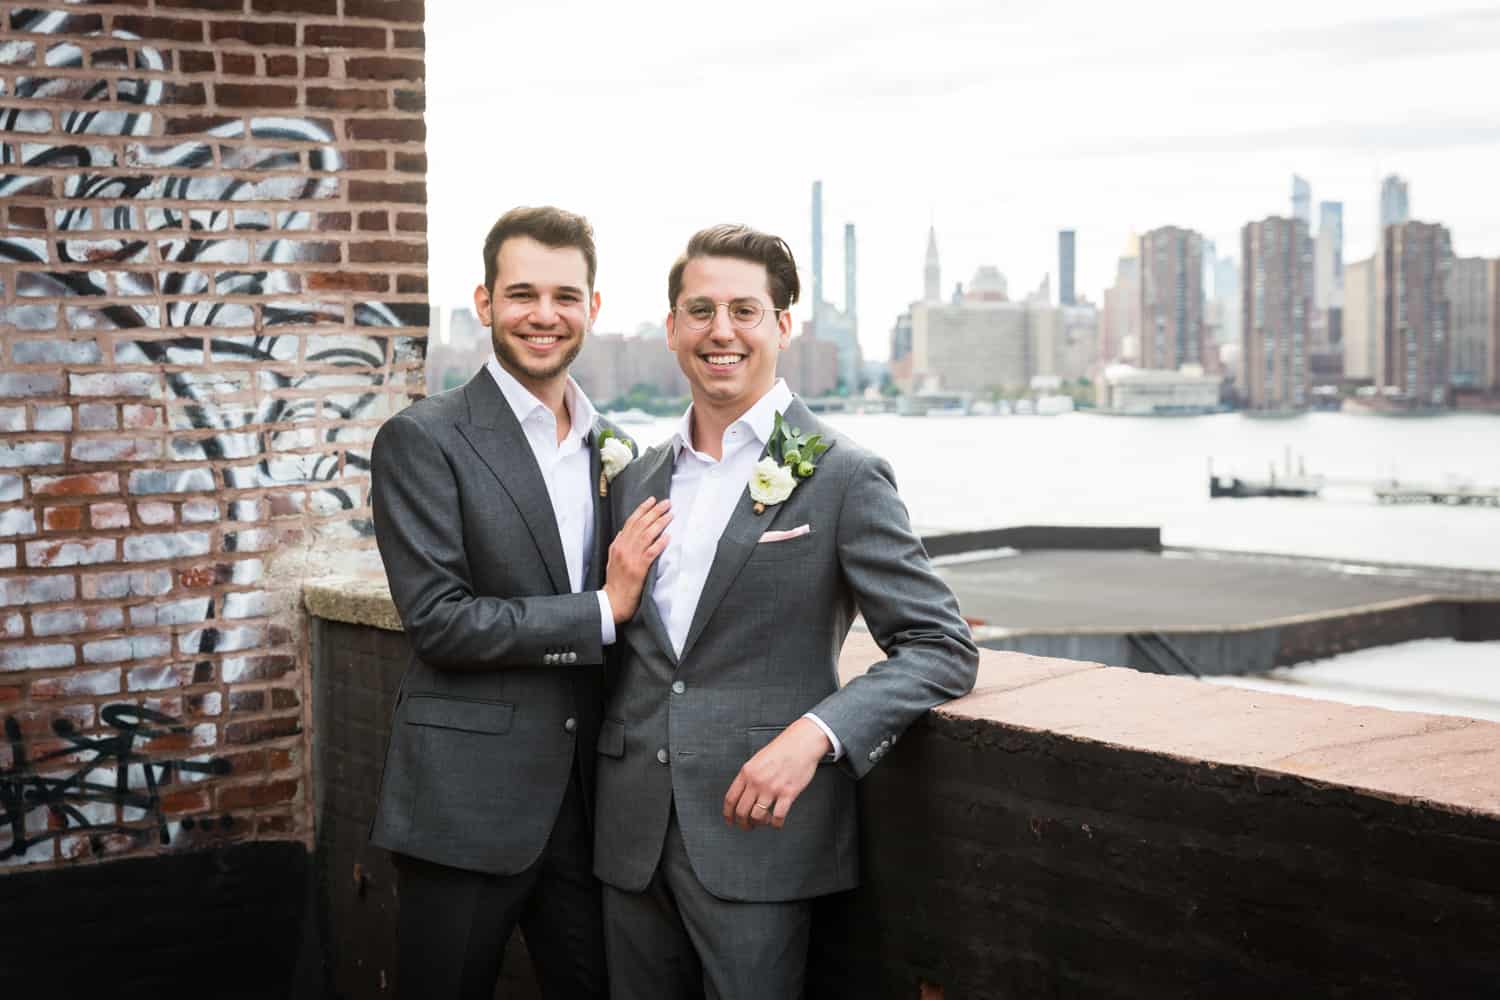 Greenpoint Loft wedding photos of two grooms on the roof with NYC skyline in background